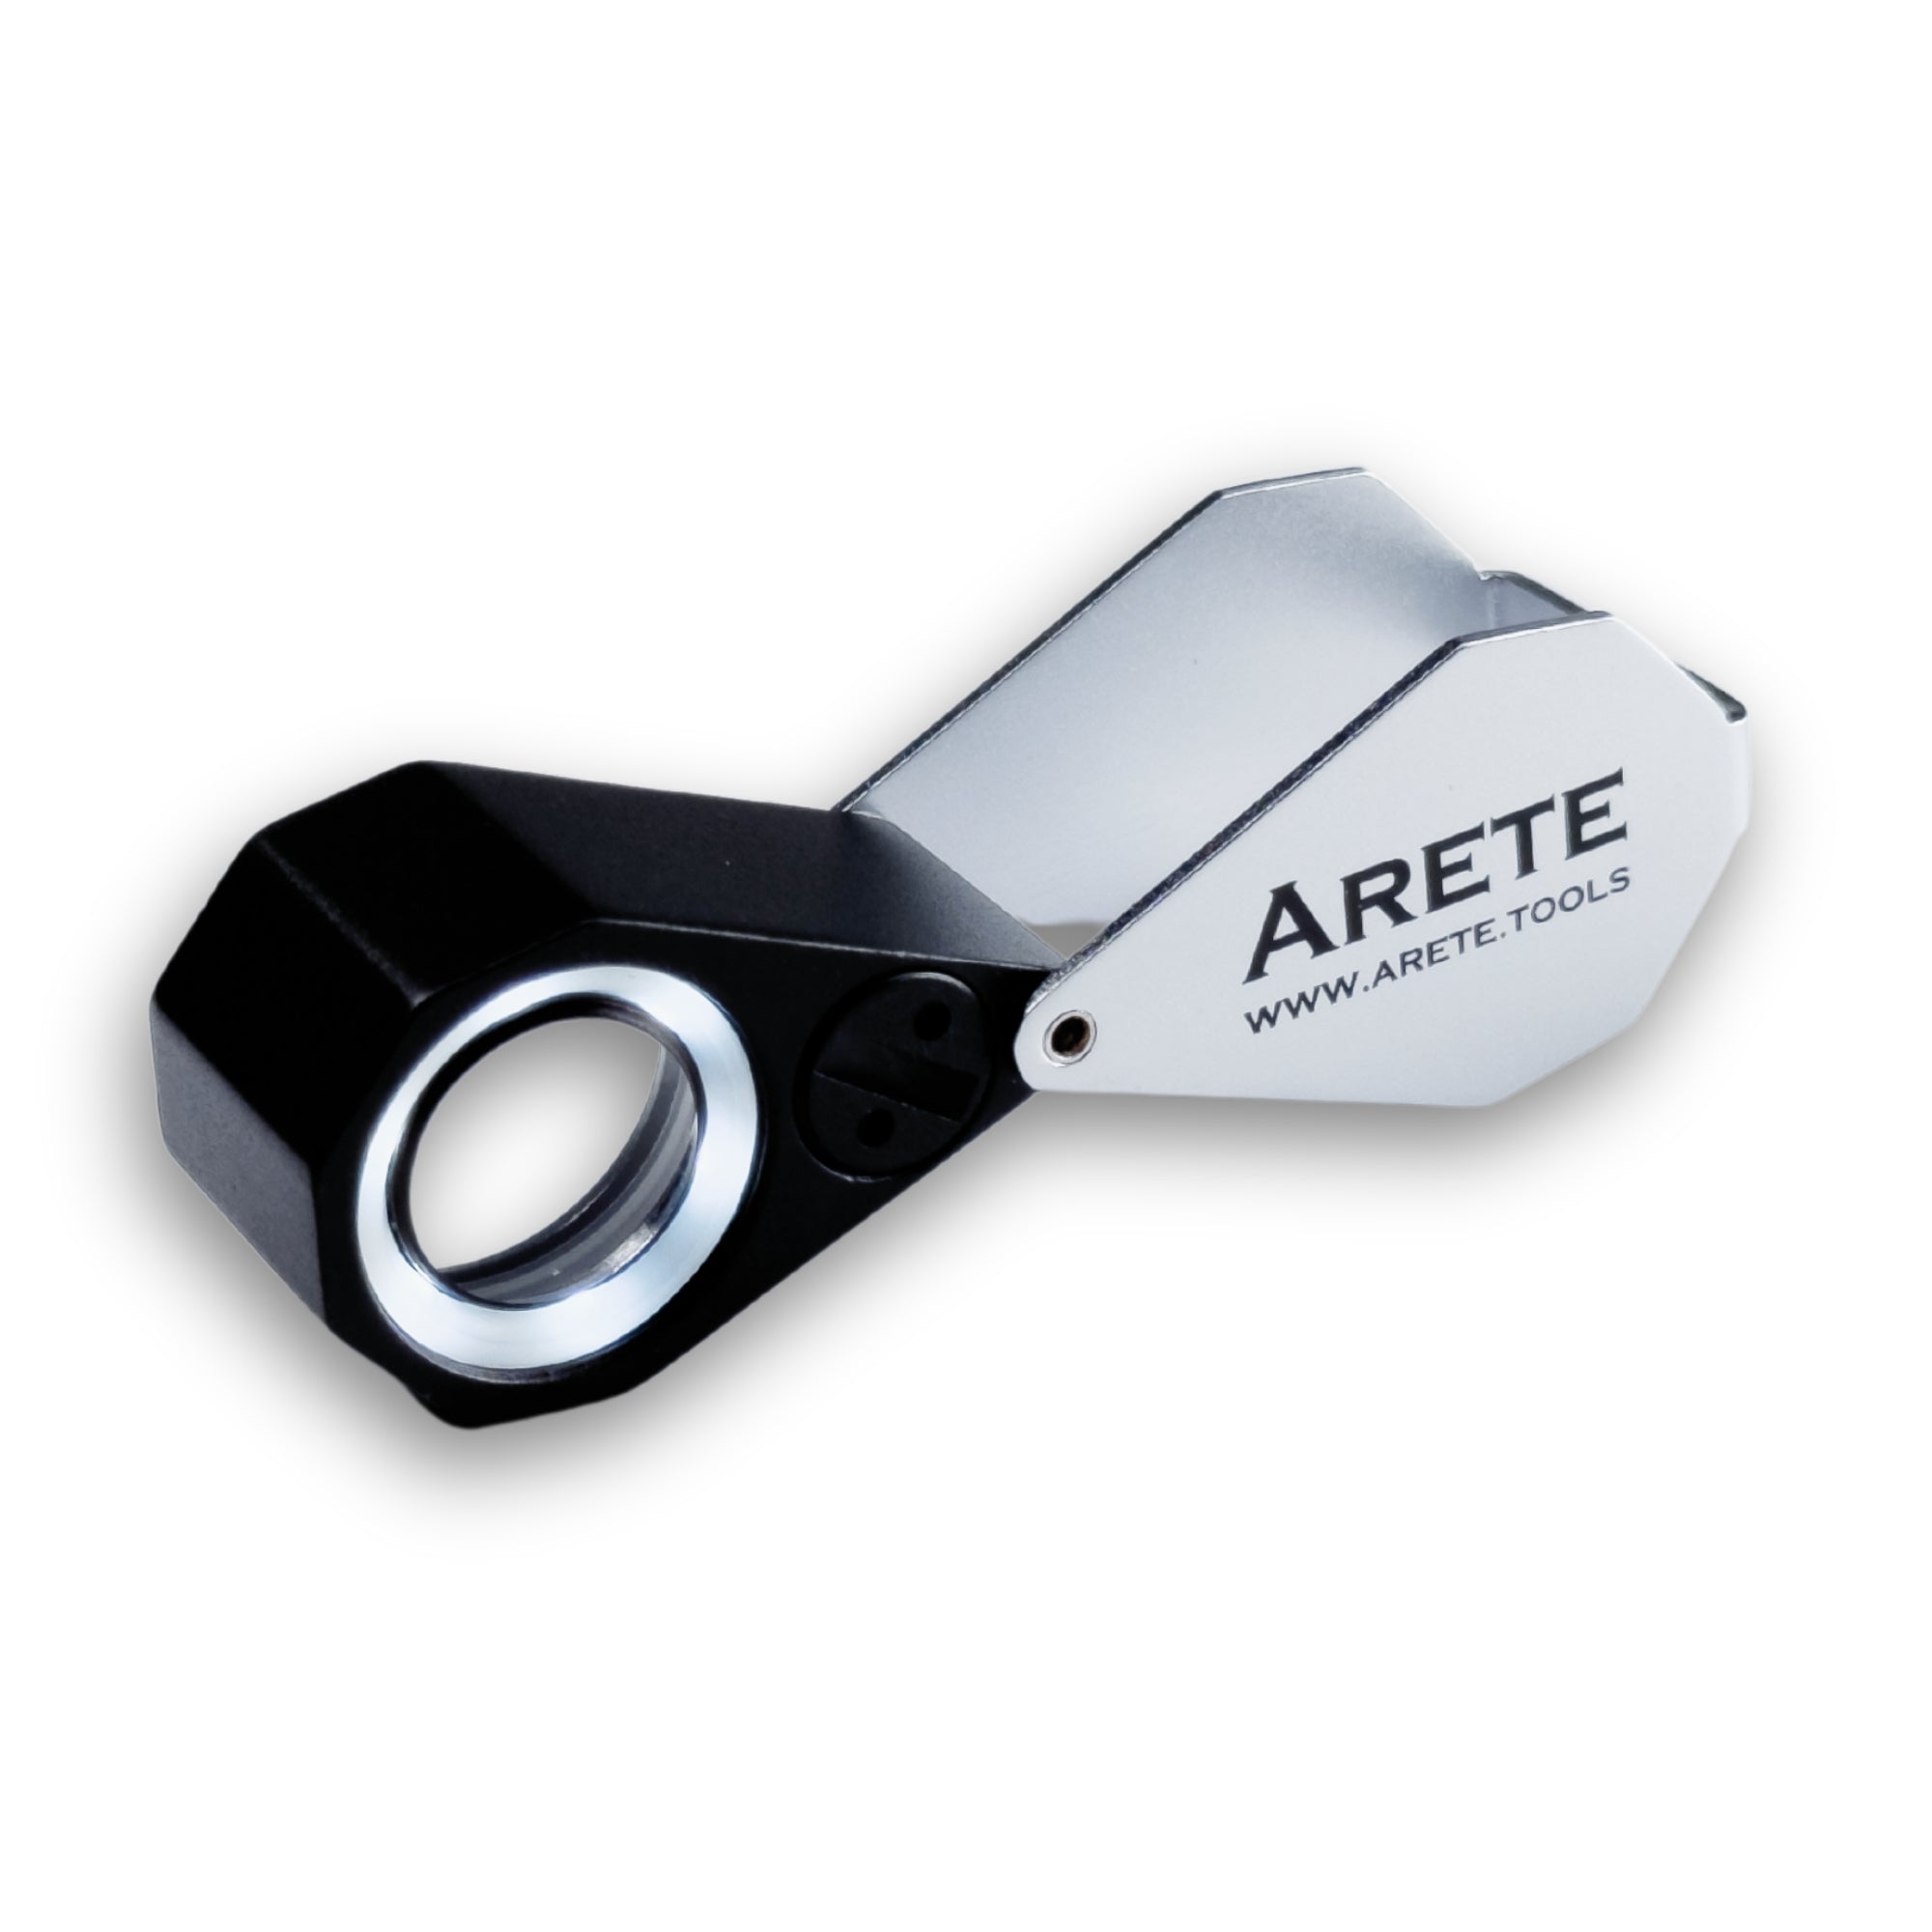 Pocket loupe 10x - 21mm with LED Light battery powered